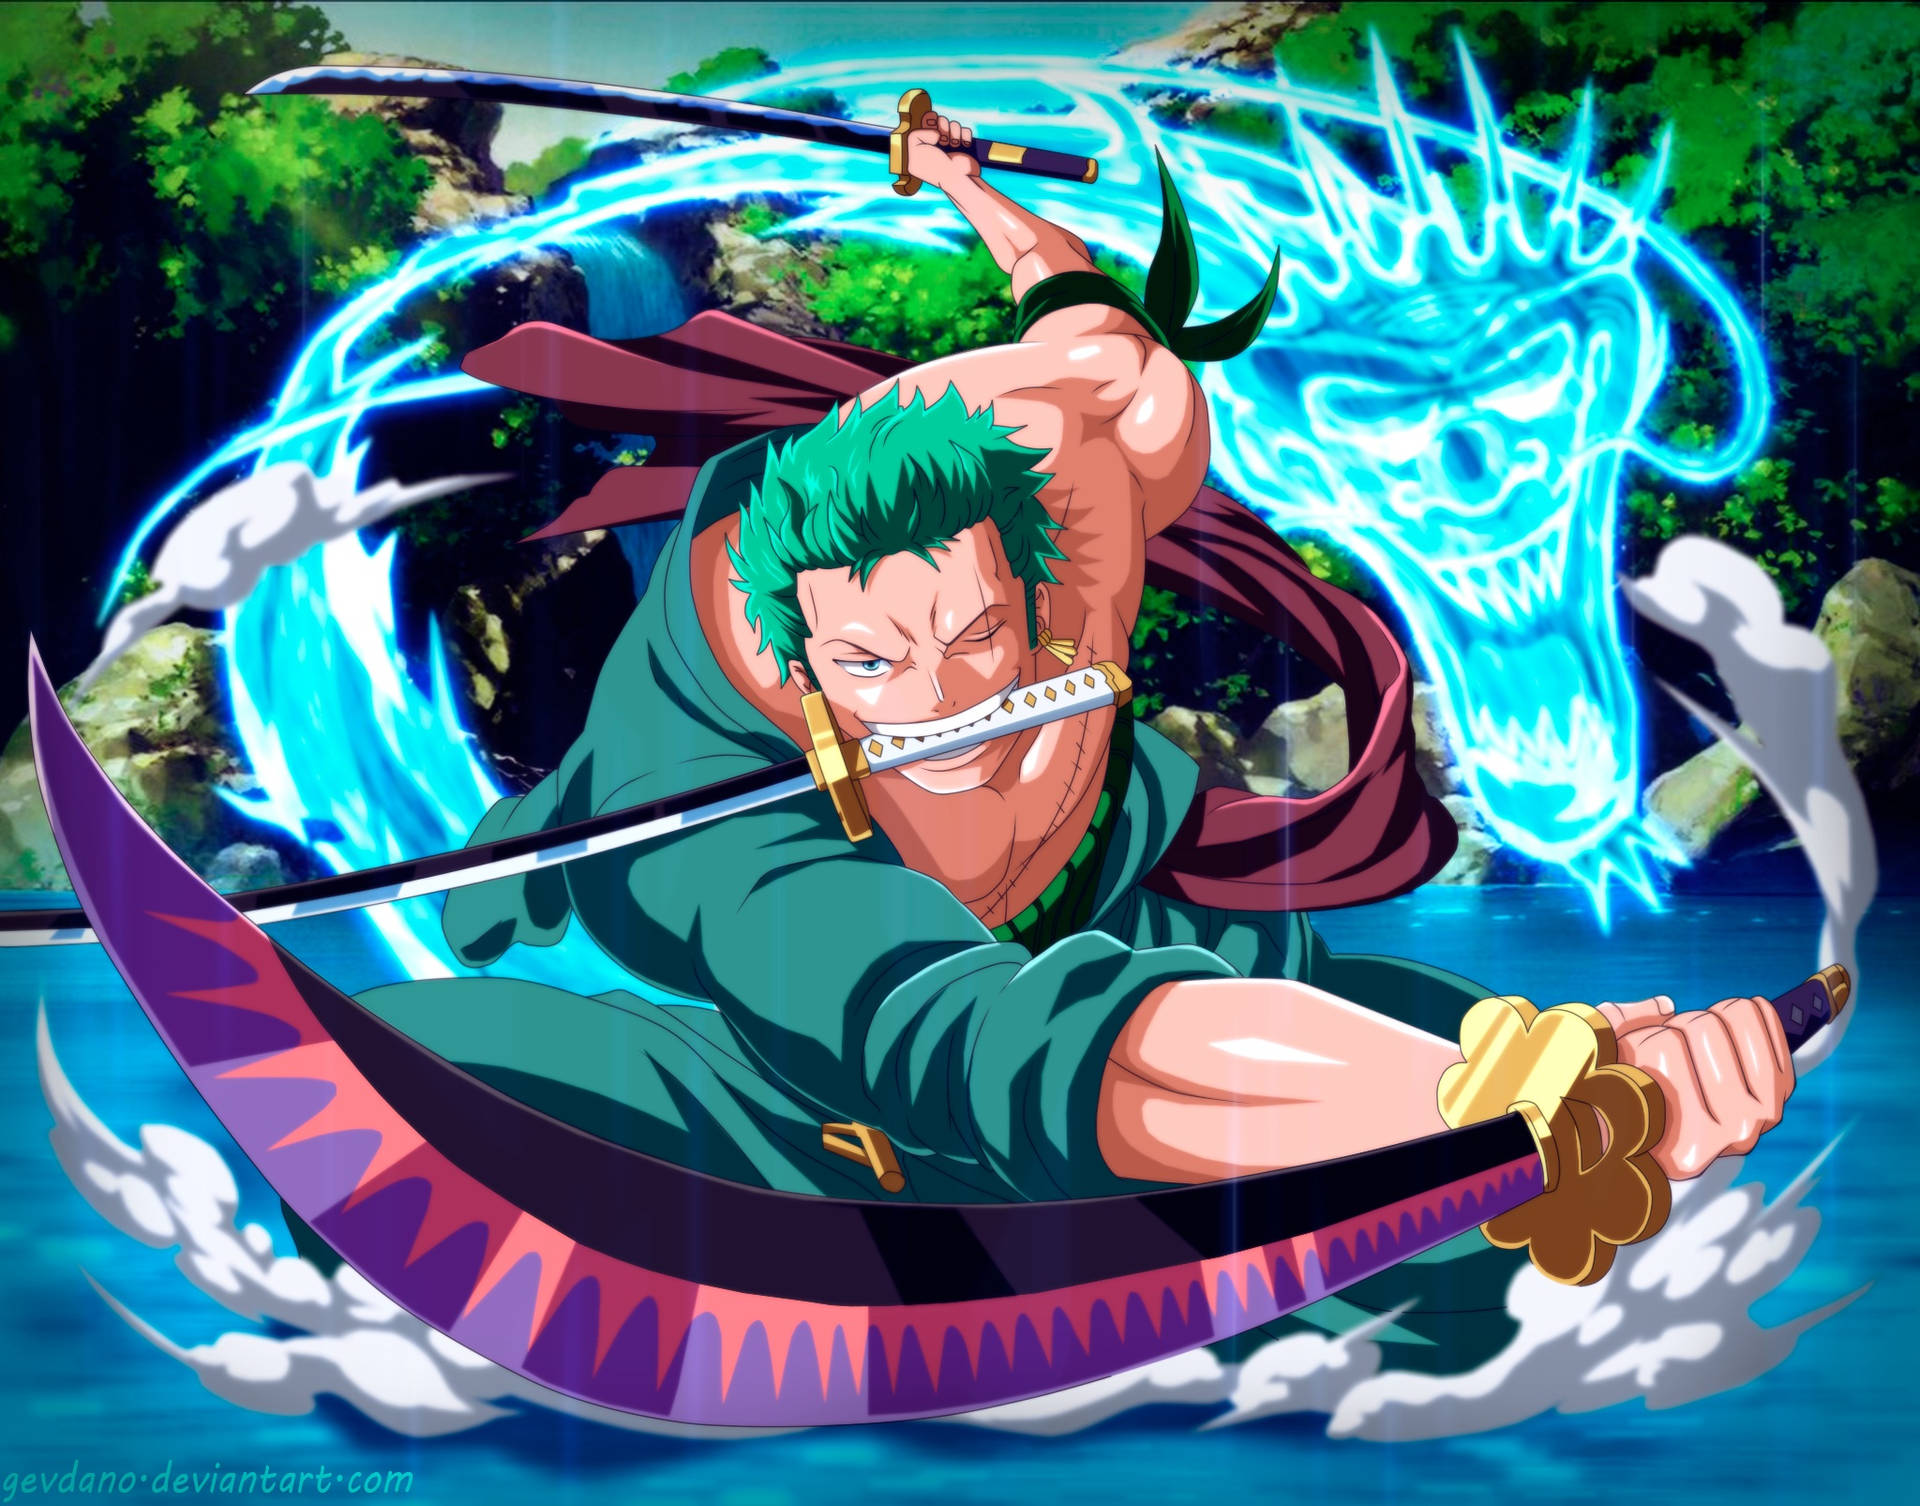 Breaking: Exclusive Deep Dive Reveals Unknown Facts About One Piece's Fan-Favorite, Roronoa Zoro